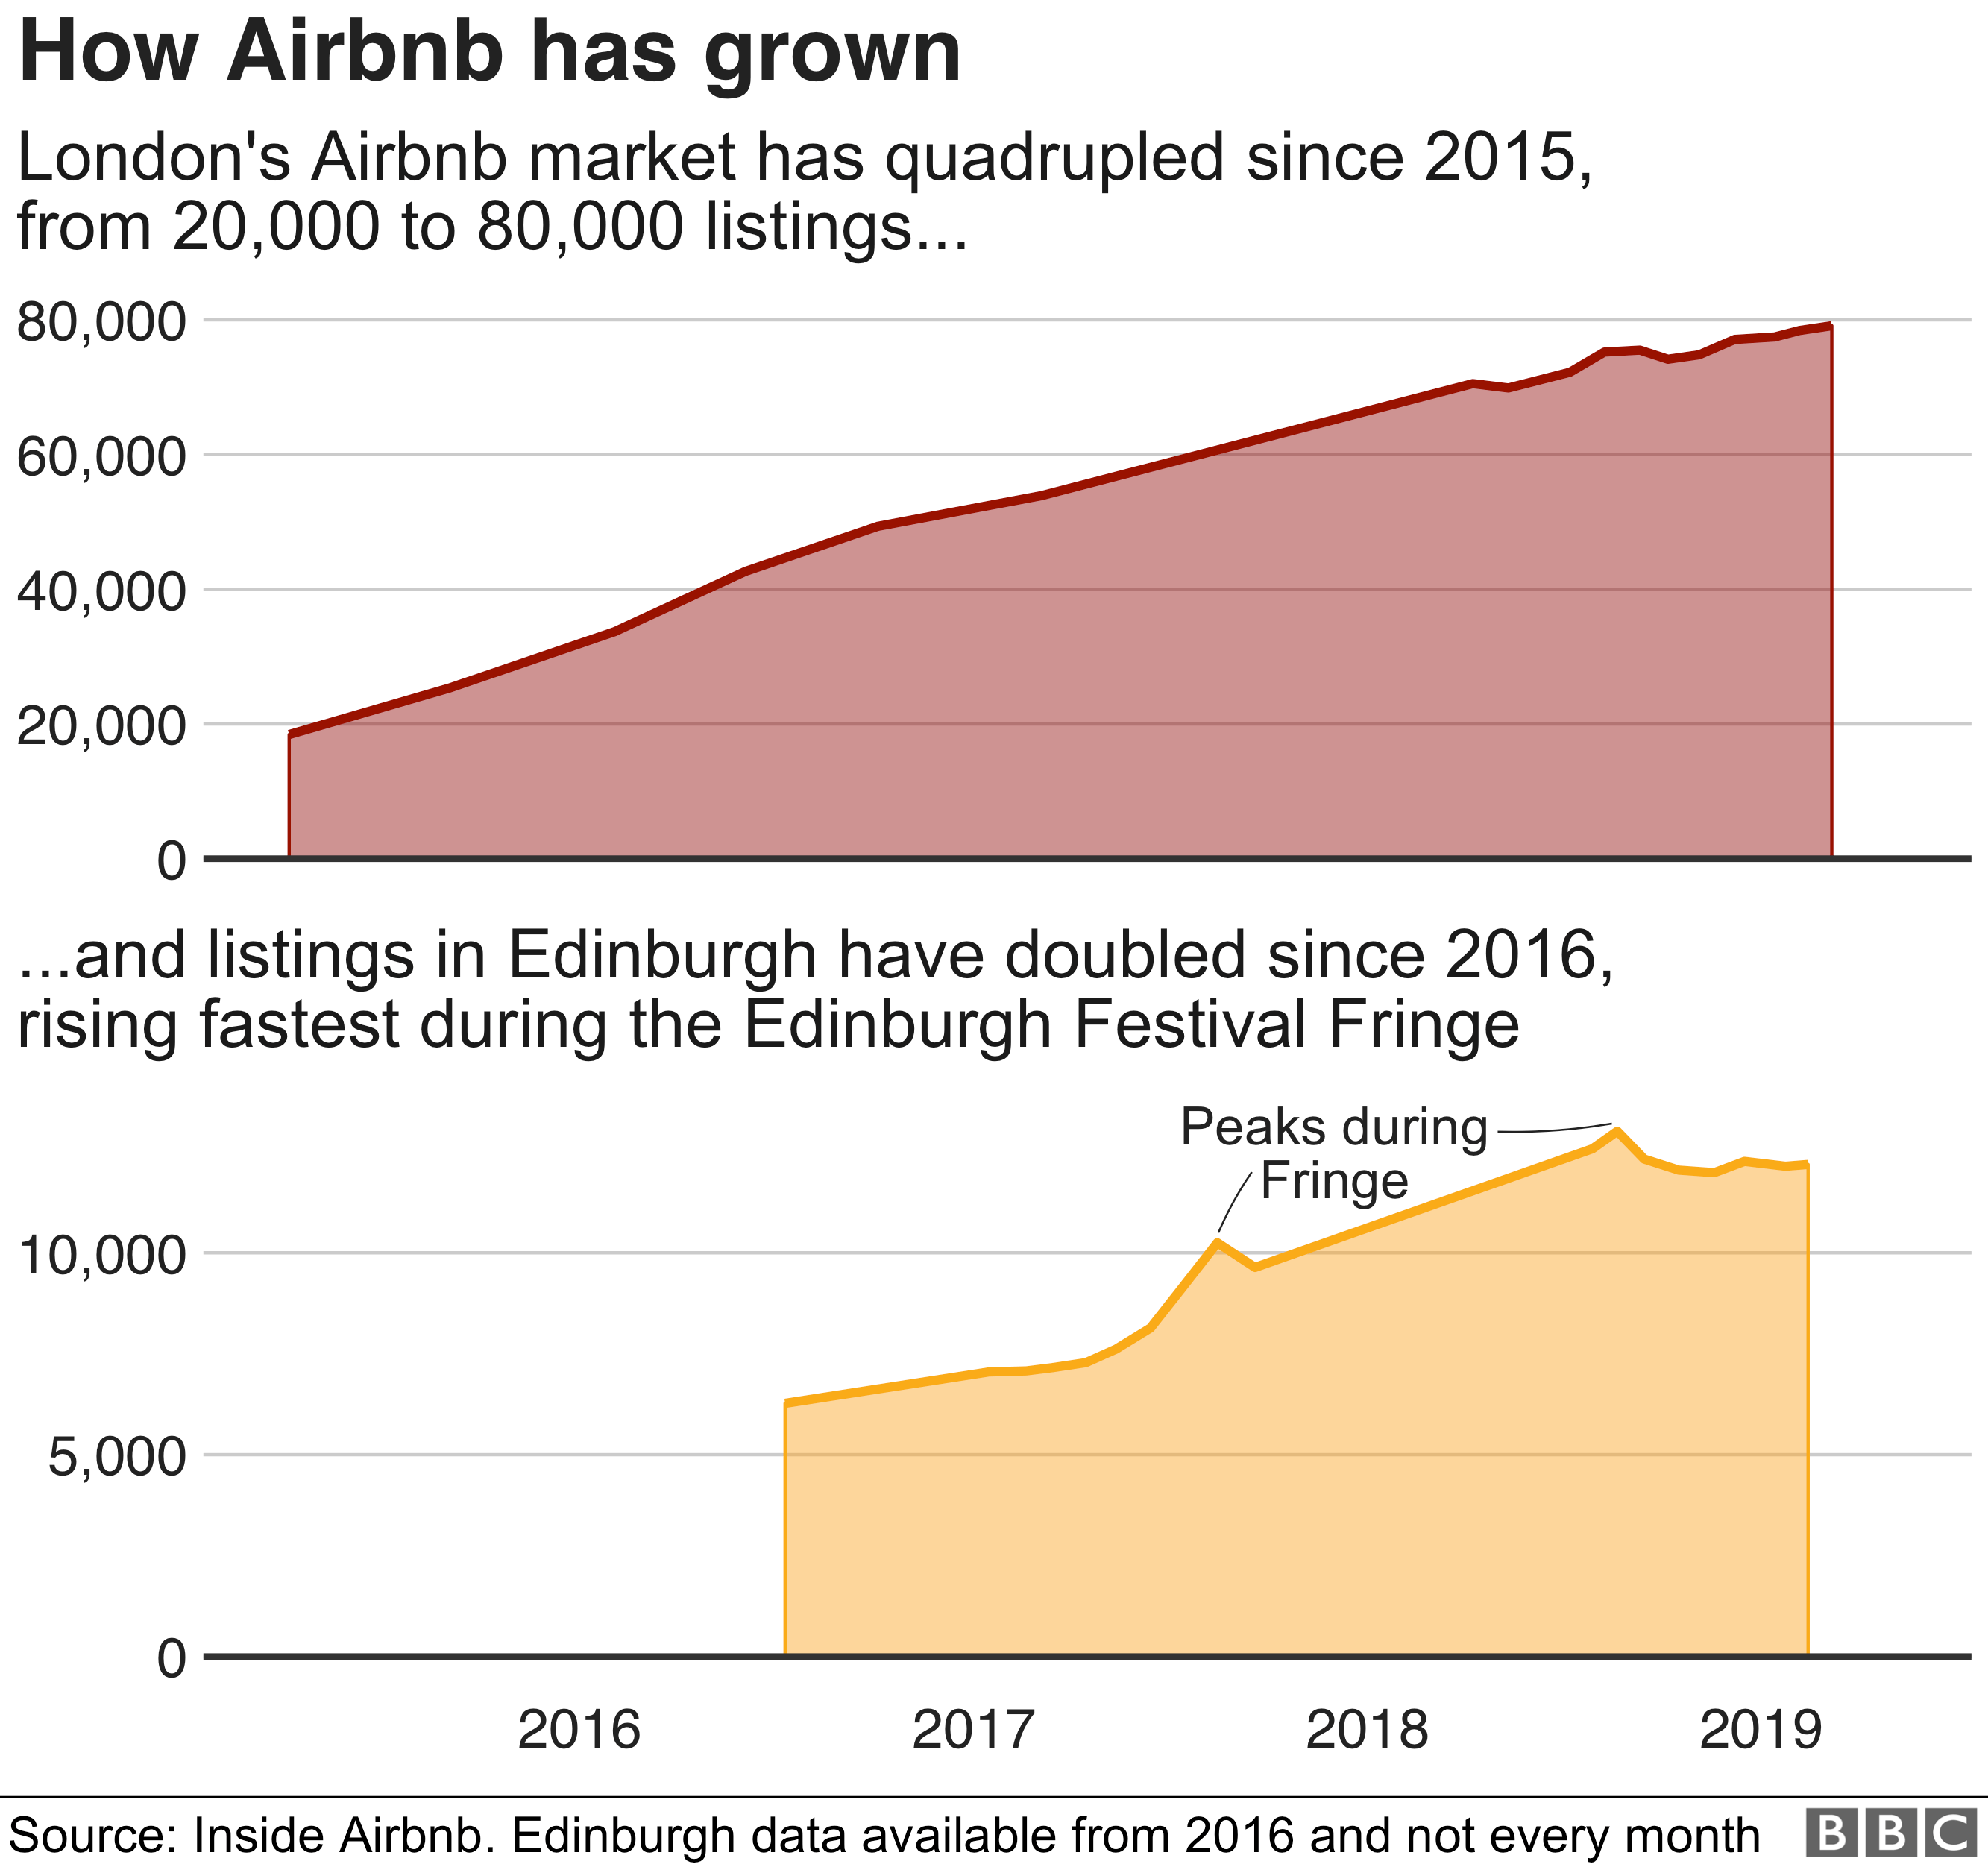 Chart showing how Airbnb listings have grown fourfold in London since 2015 and doubled in Edinburgh since 2016.